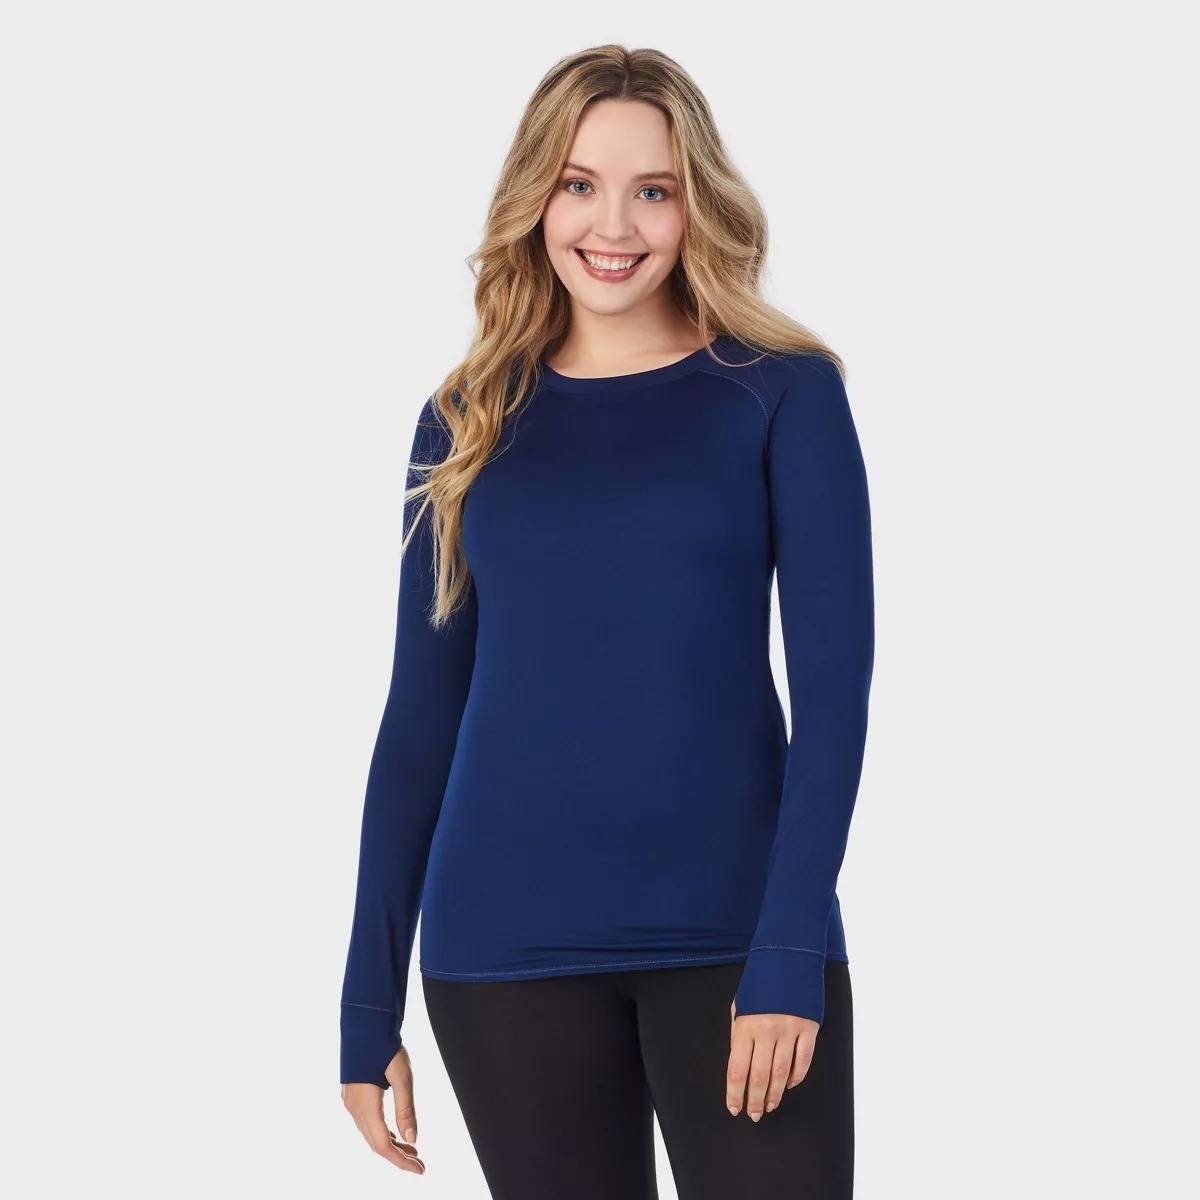 blue long sleeve top with thumbholes on model